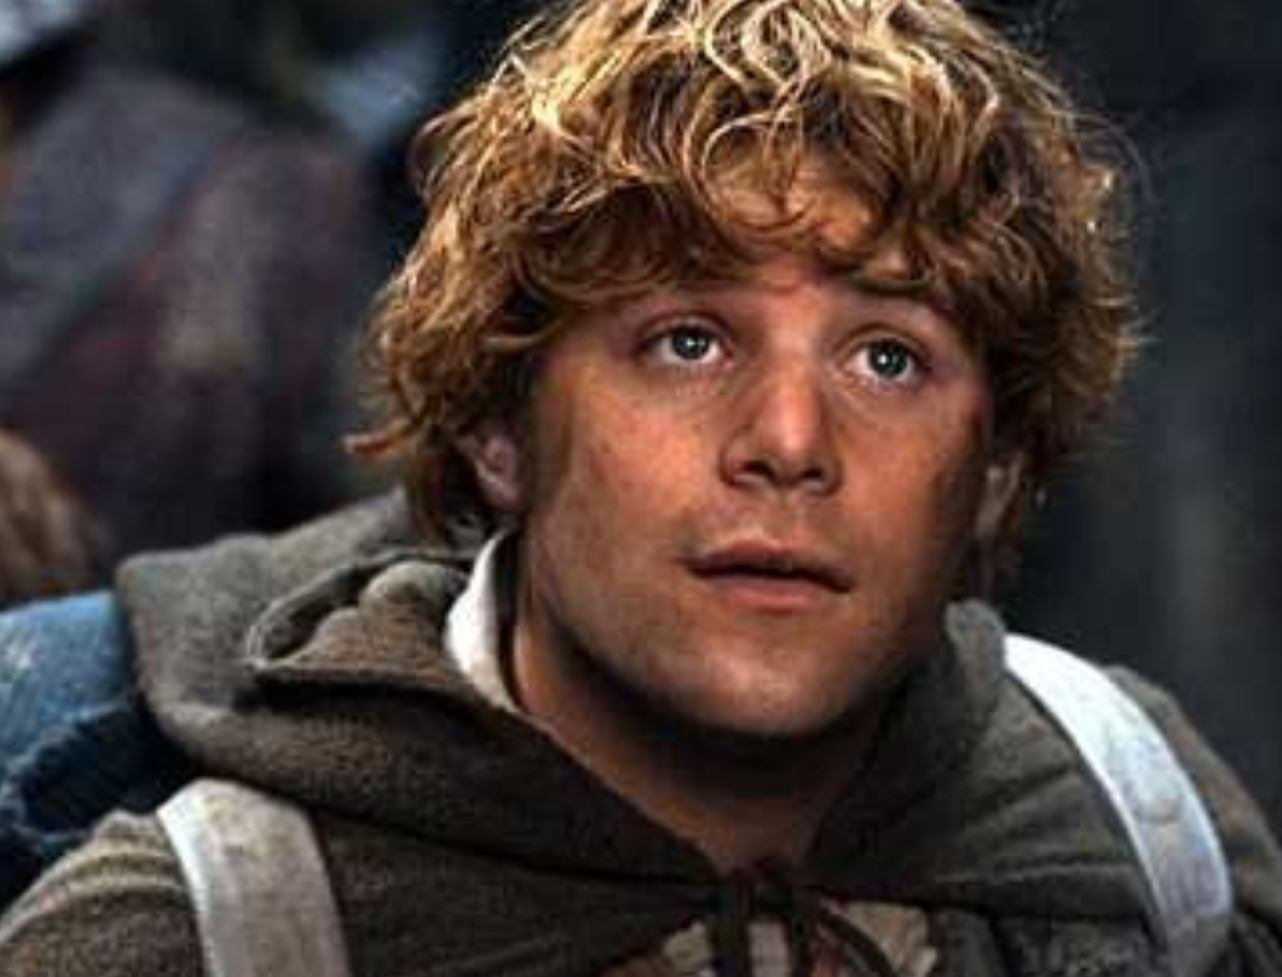 The Lord of the Rings: Sean Astin Remembers Receiving Some Well-Deserved Criticism While Filming